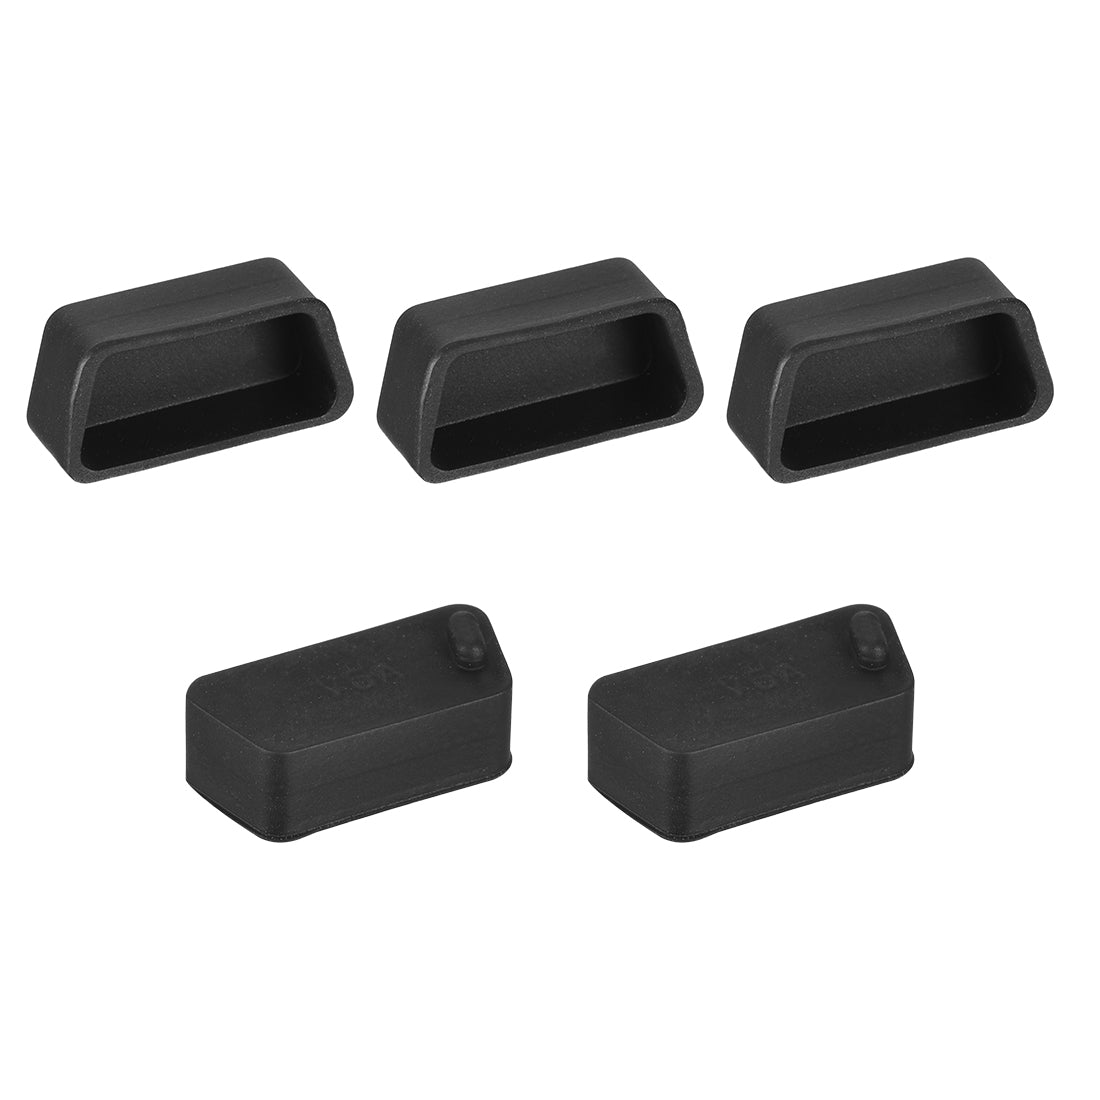 uxcell Uxcell Silicone VGA Port Anti-Dust Stopper Cap Cover for DB9, RS232, Black 5pcs